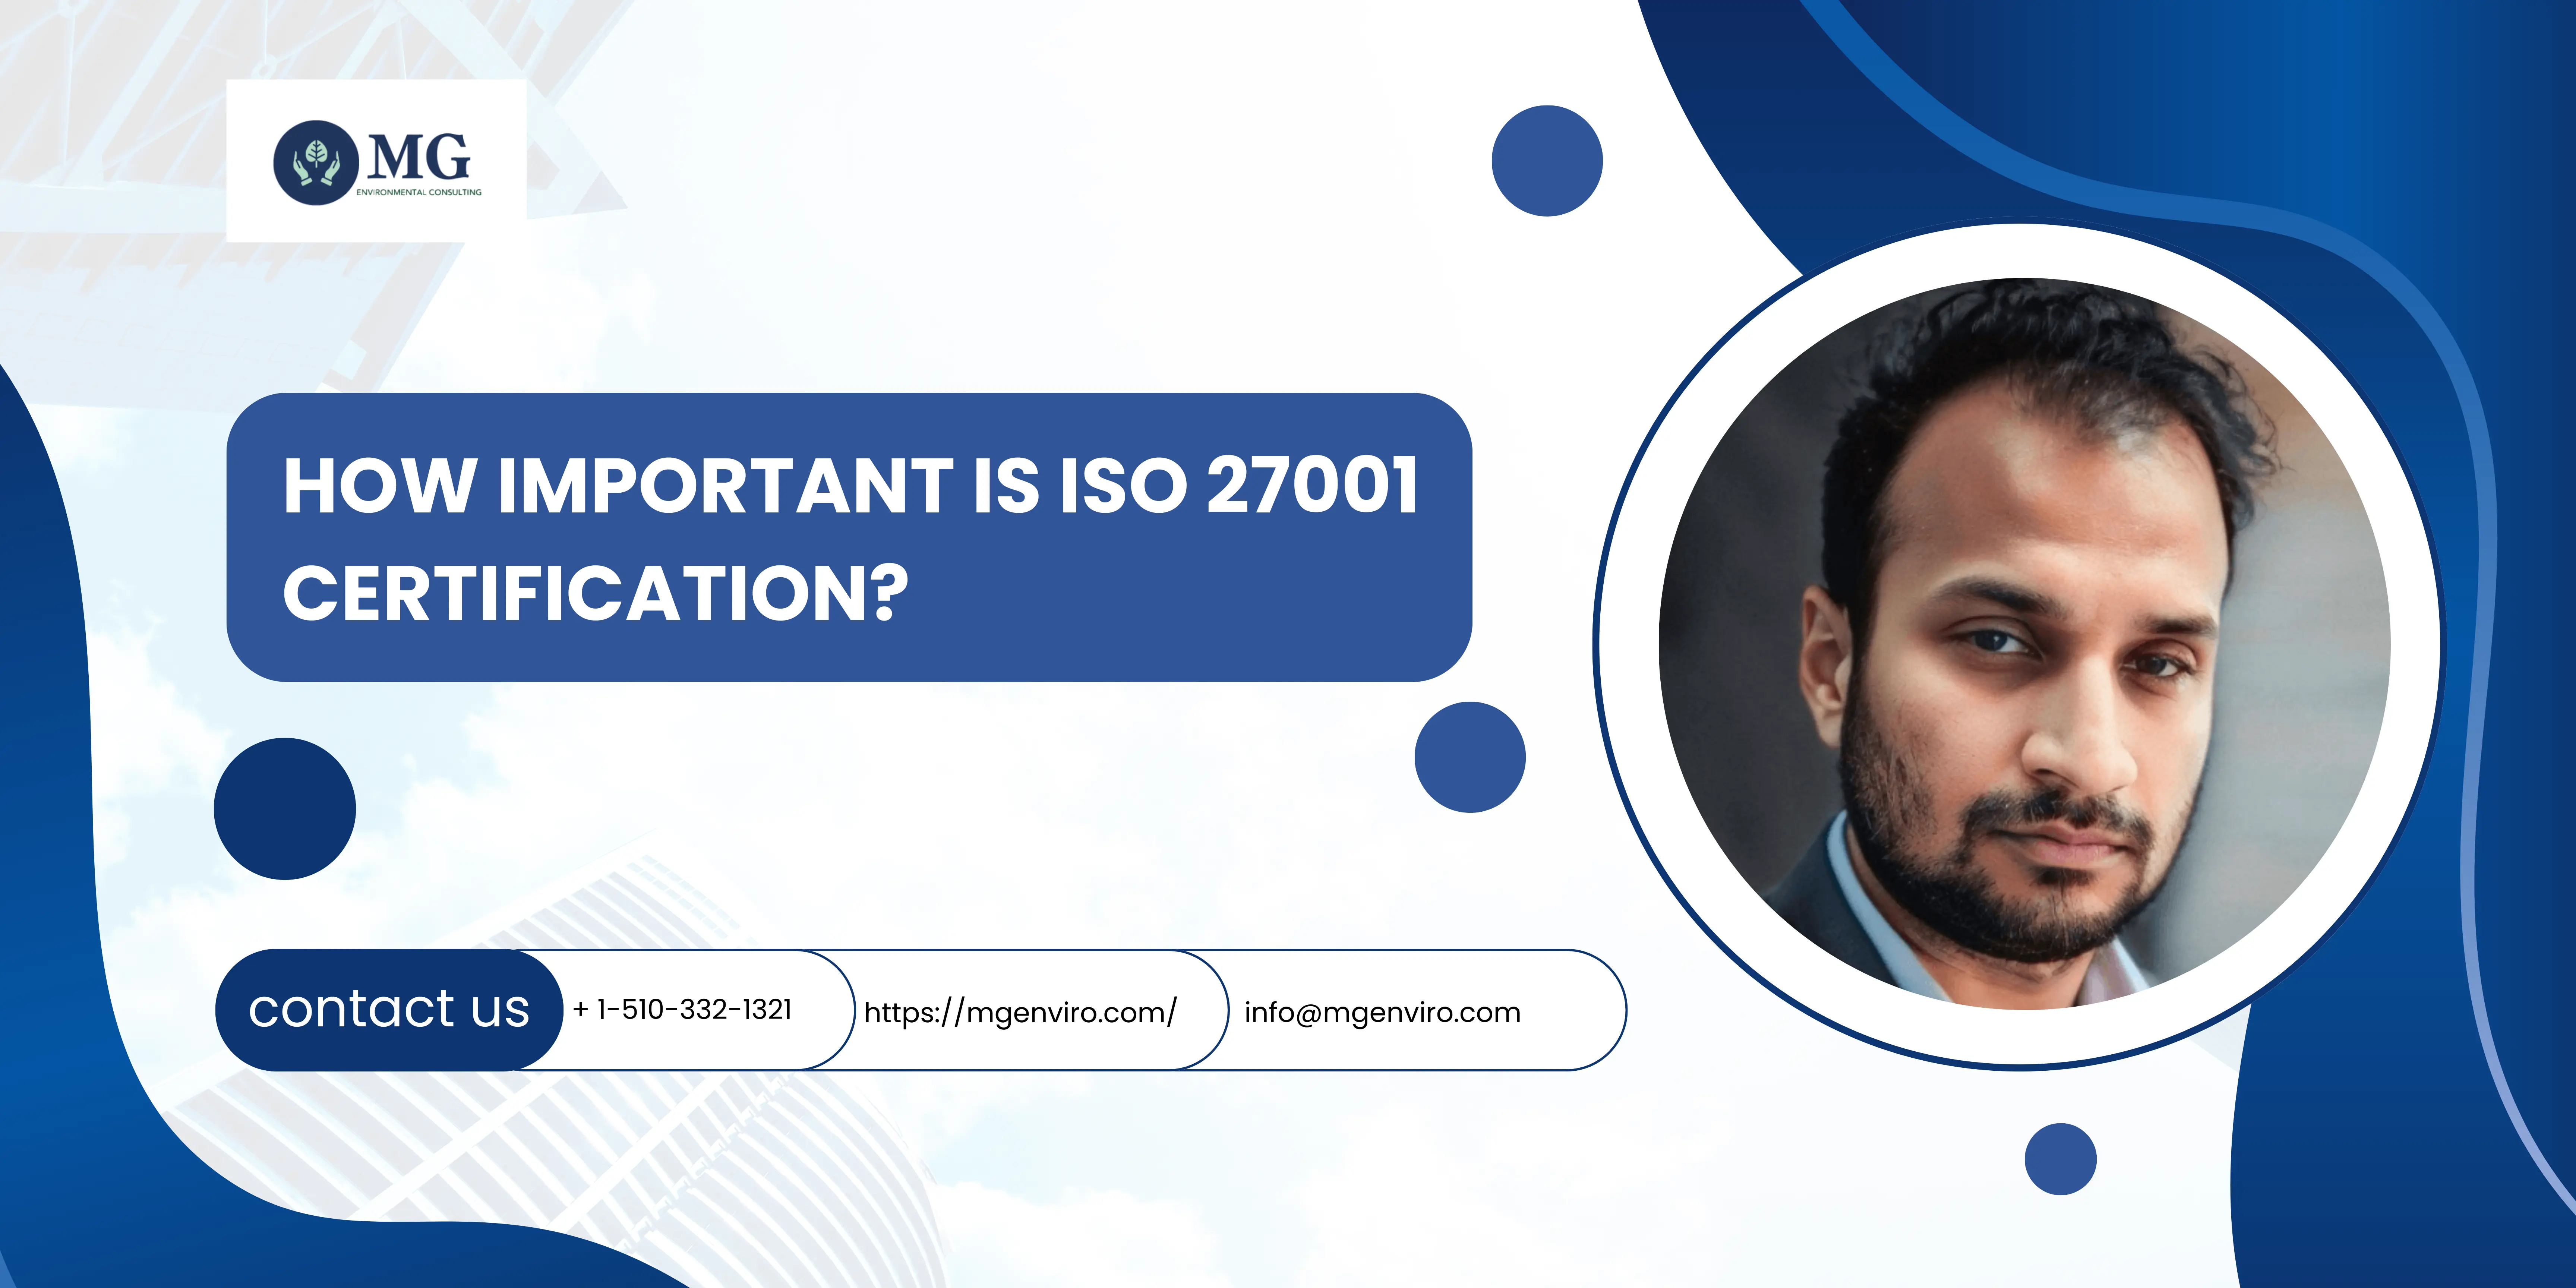 How Important is ISO 27001 Certification?